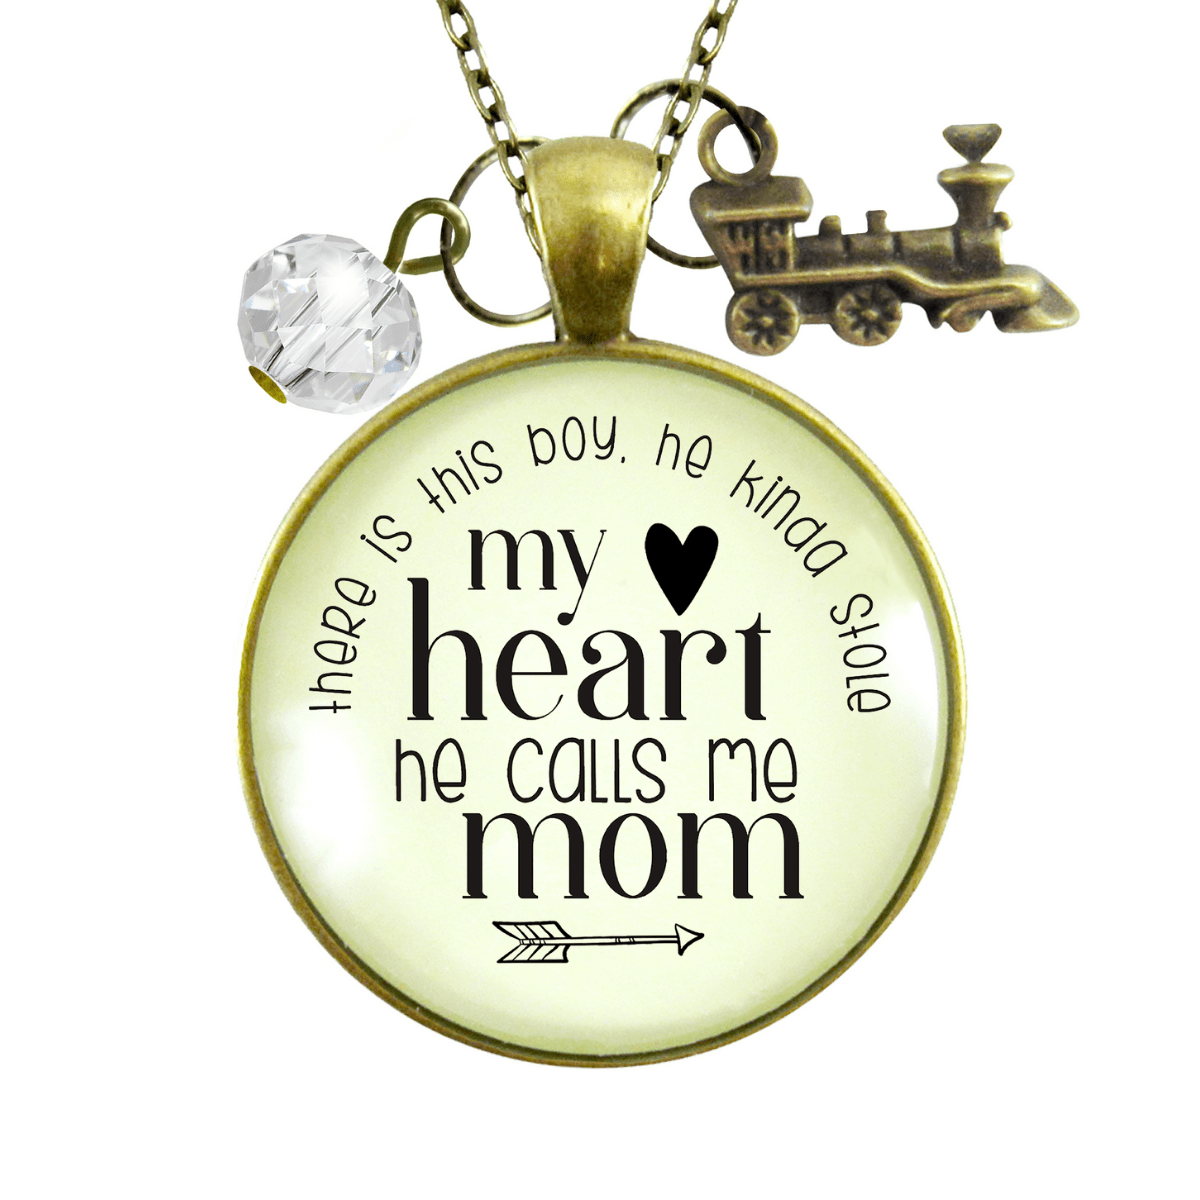 Gutsy Goodness Mom of Son Necklace This Boy He Kinda Stole My Heart Train Motherhood Jewelry - Gutsy Goodness Handmade Jewelry;Mom Of Son Necklace This Boy He Kinda Stole My Heart Train Motherhood Jewelry - Gutsy Goodness Handmade Jewelry Gifts